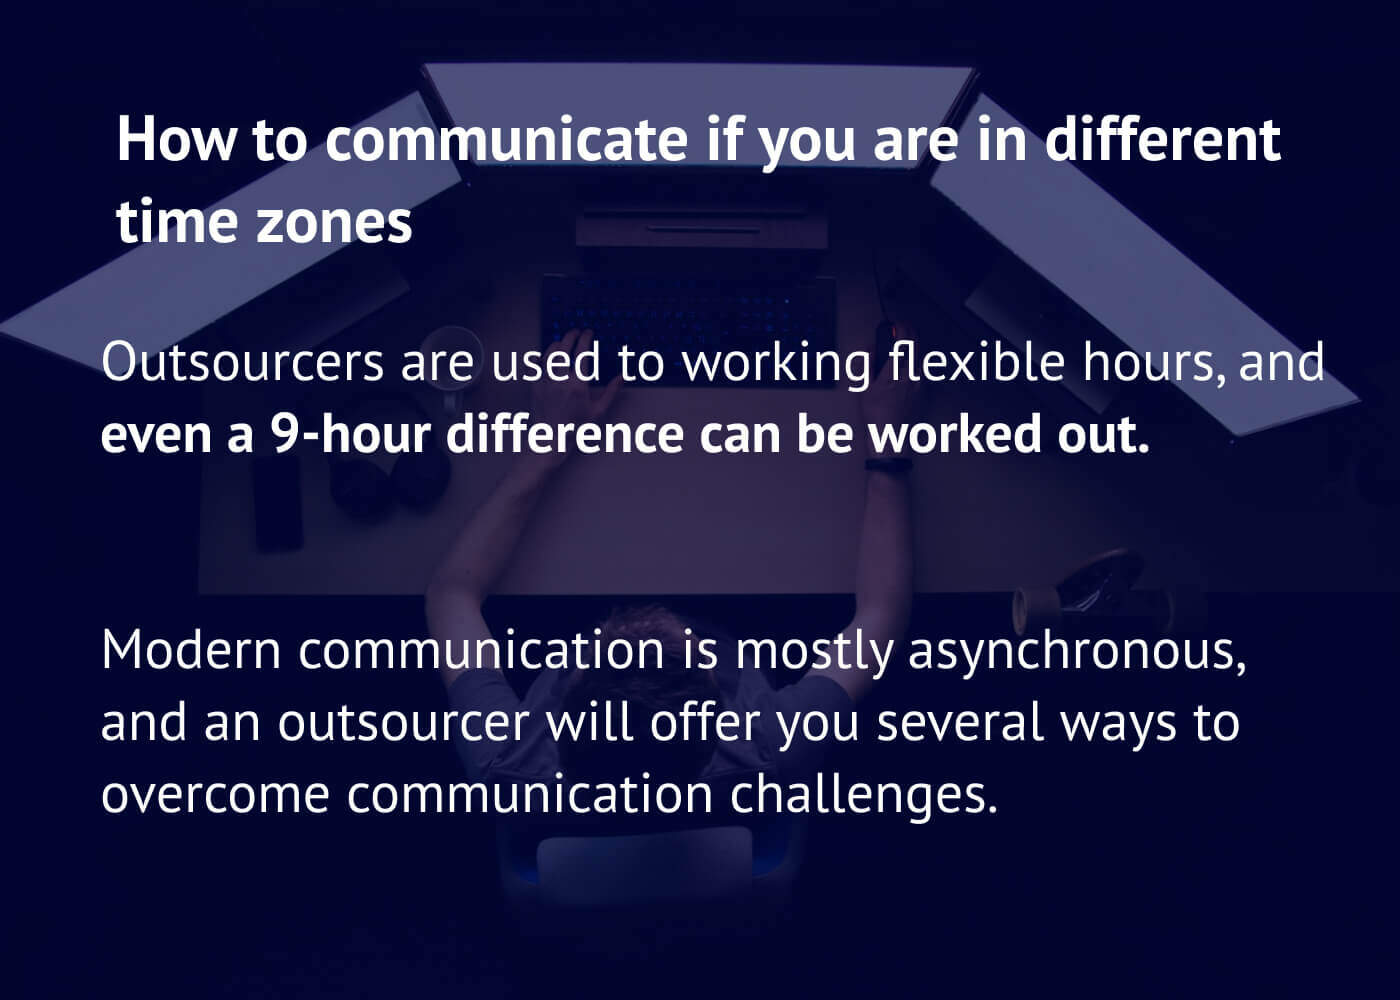 How do outsourcers carry out communication in different time zones: how to communicate if you are in different time zones